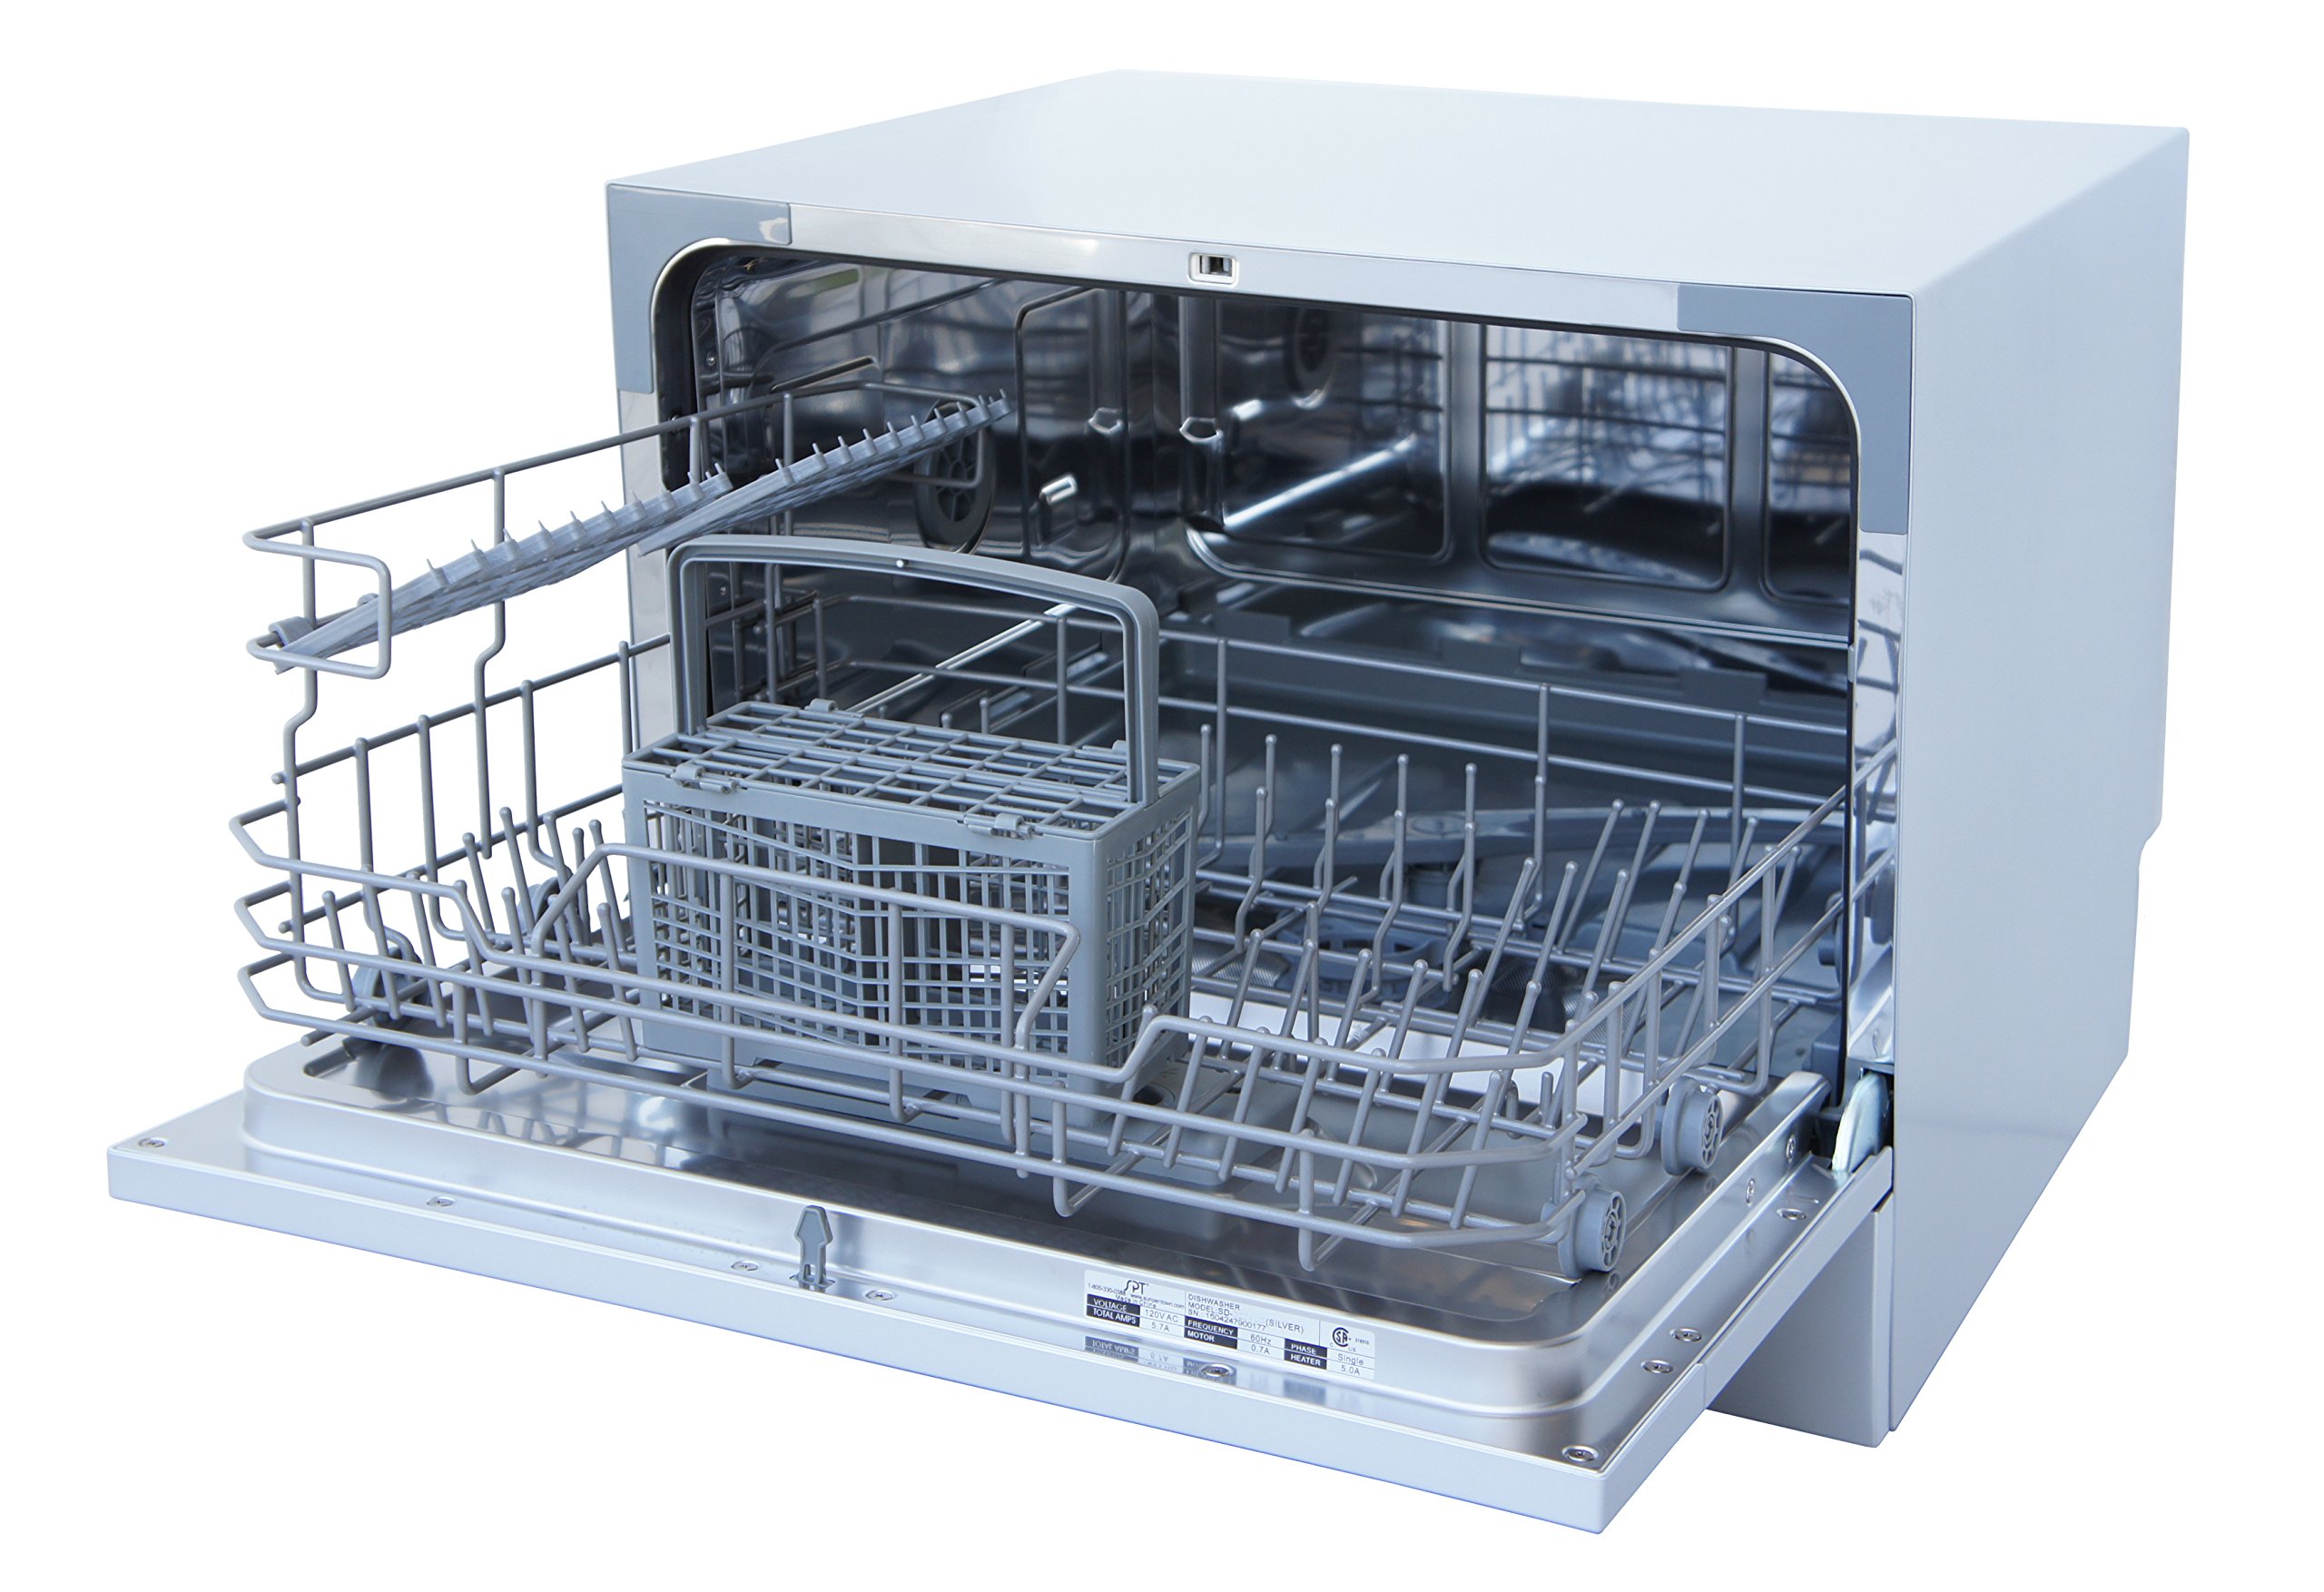 SPT SD-2225DW Compact Countertop Dishwasher/Delay Start-Energy Star Portable Dishwasher with Stainless Steel Interior and 6 Place Settings Rack Silverware Basket/Apartment Office Home Kitchen, White